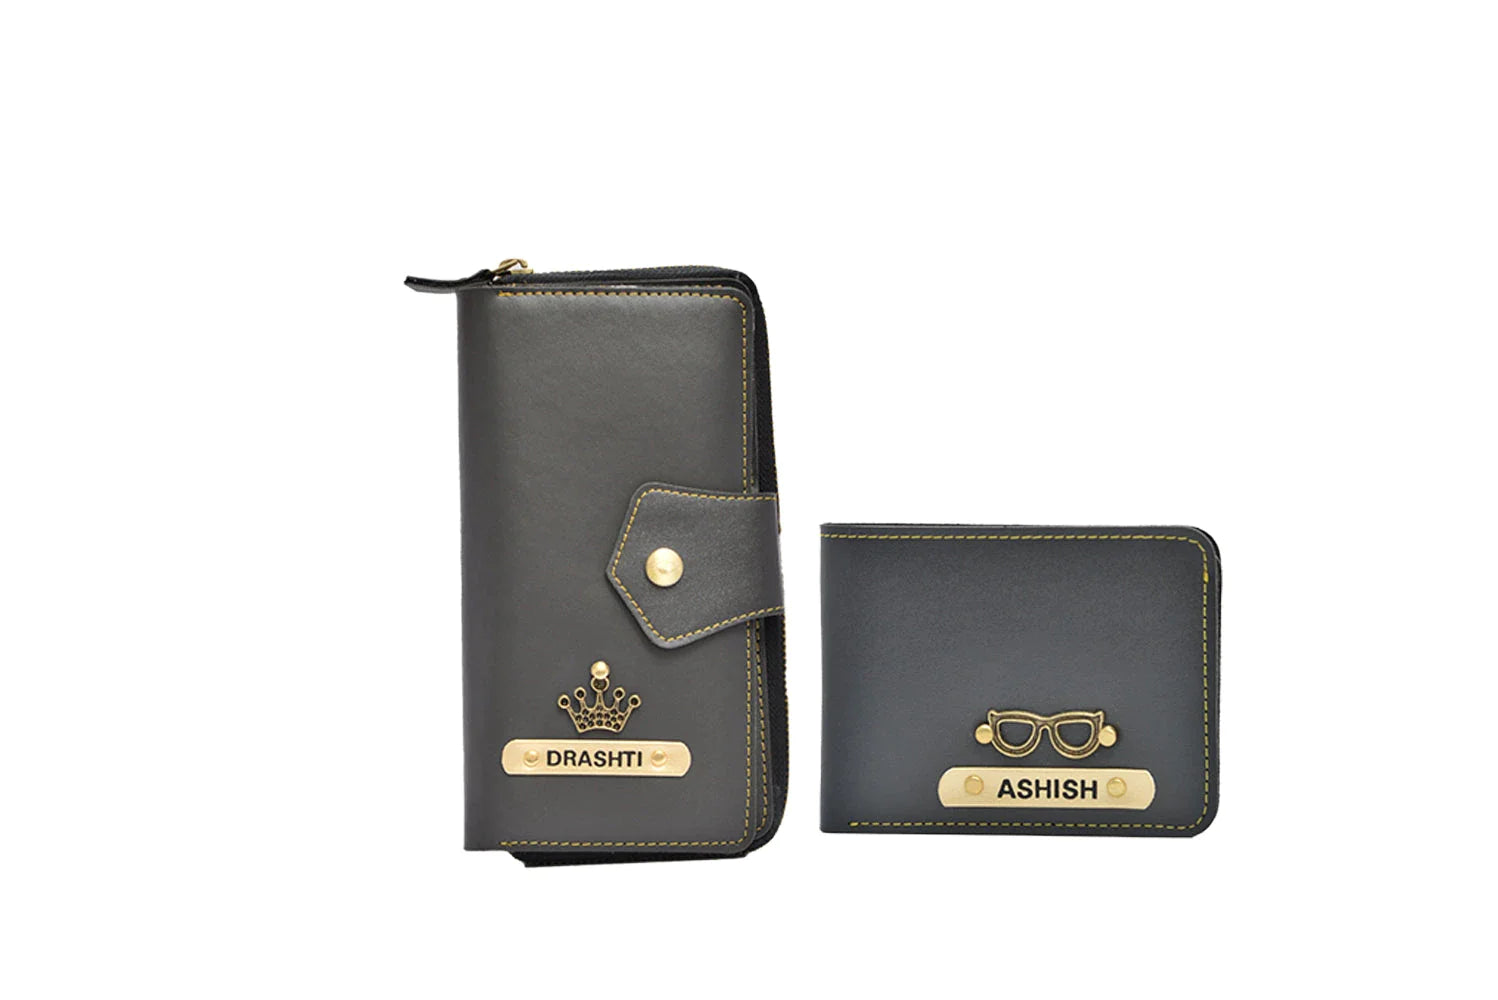 Stay organized and stylish with our personalized vegan leather card wallet, available in a range of colors.